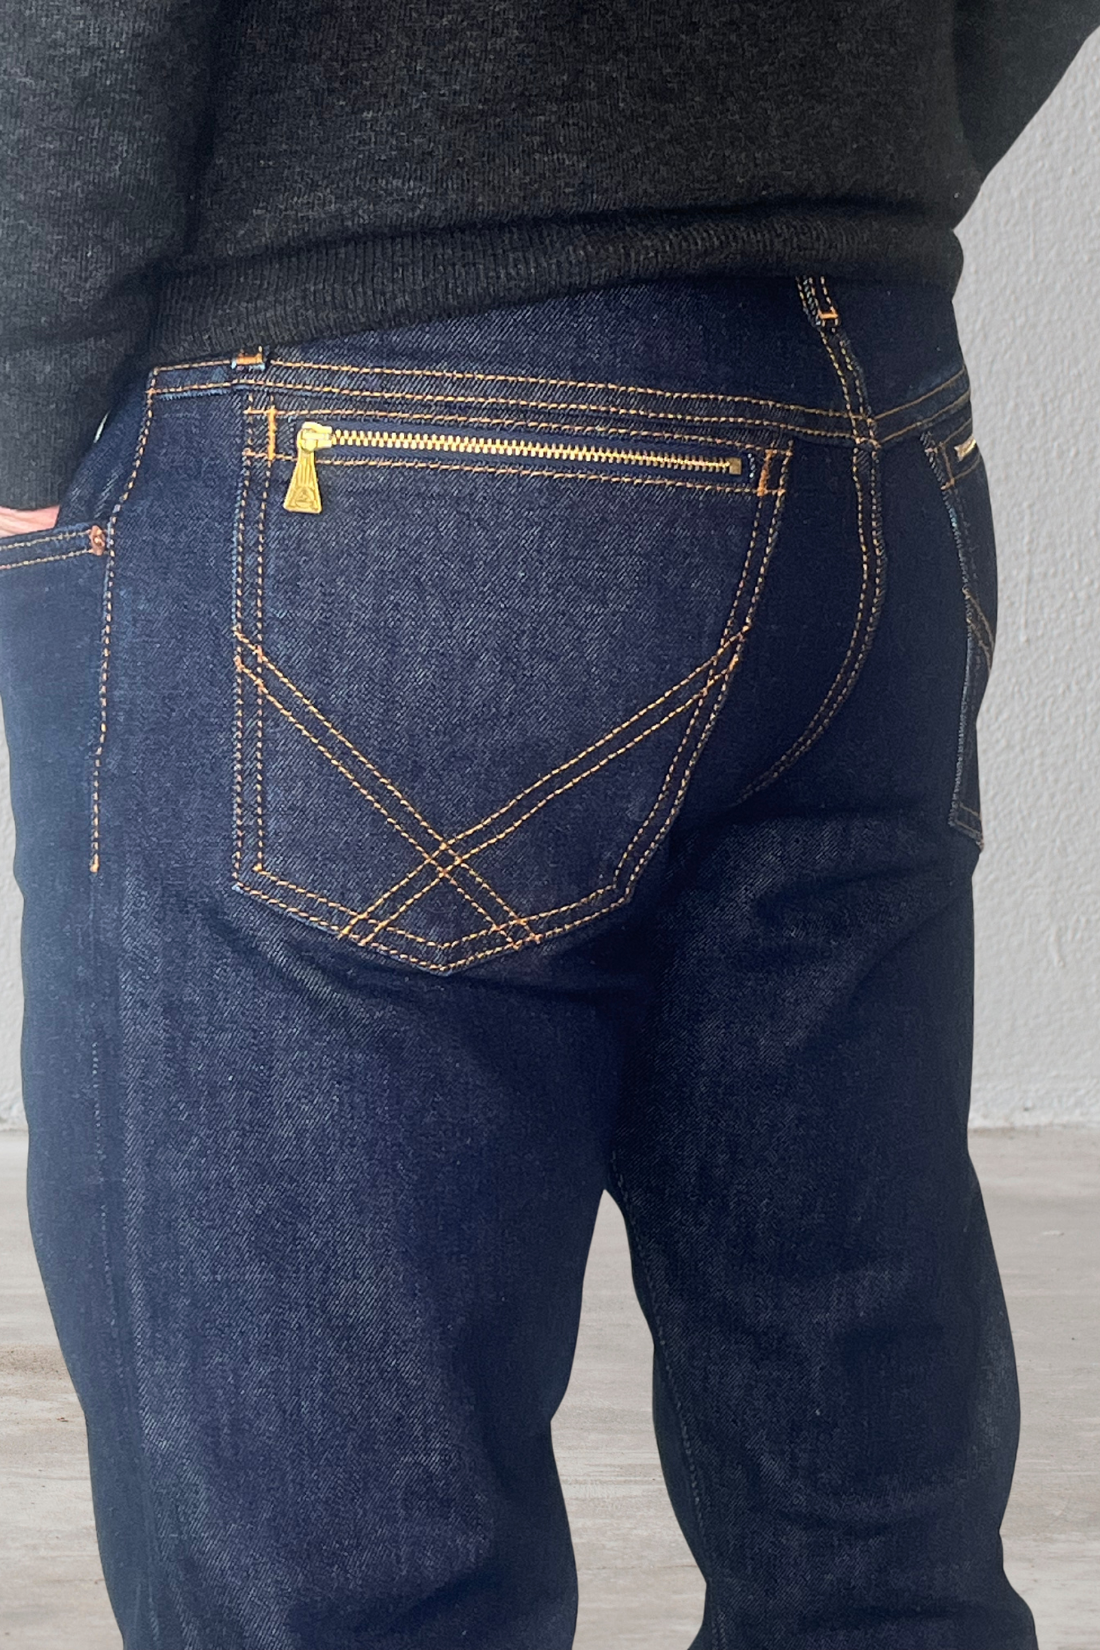 Roy Roger's Jeans Cult Zip Rinse